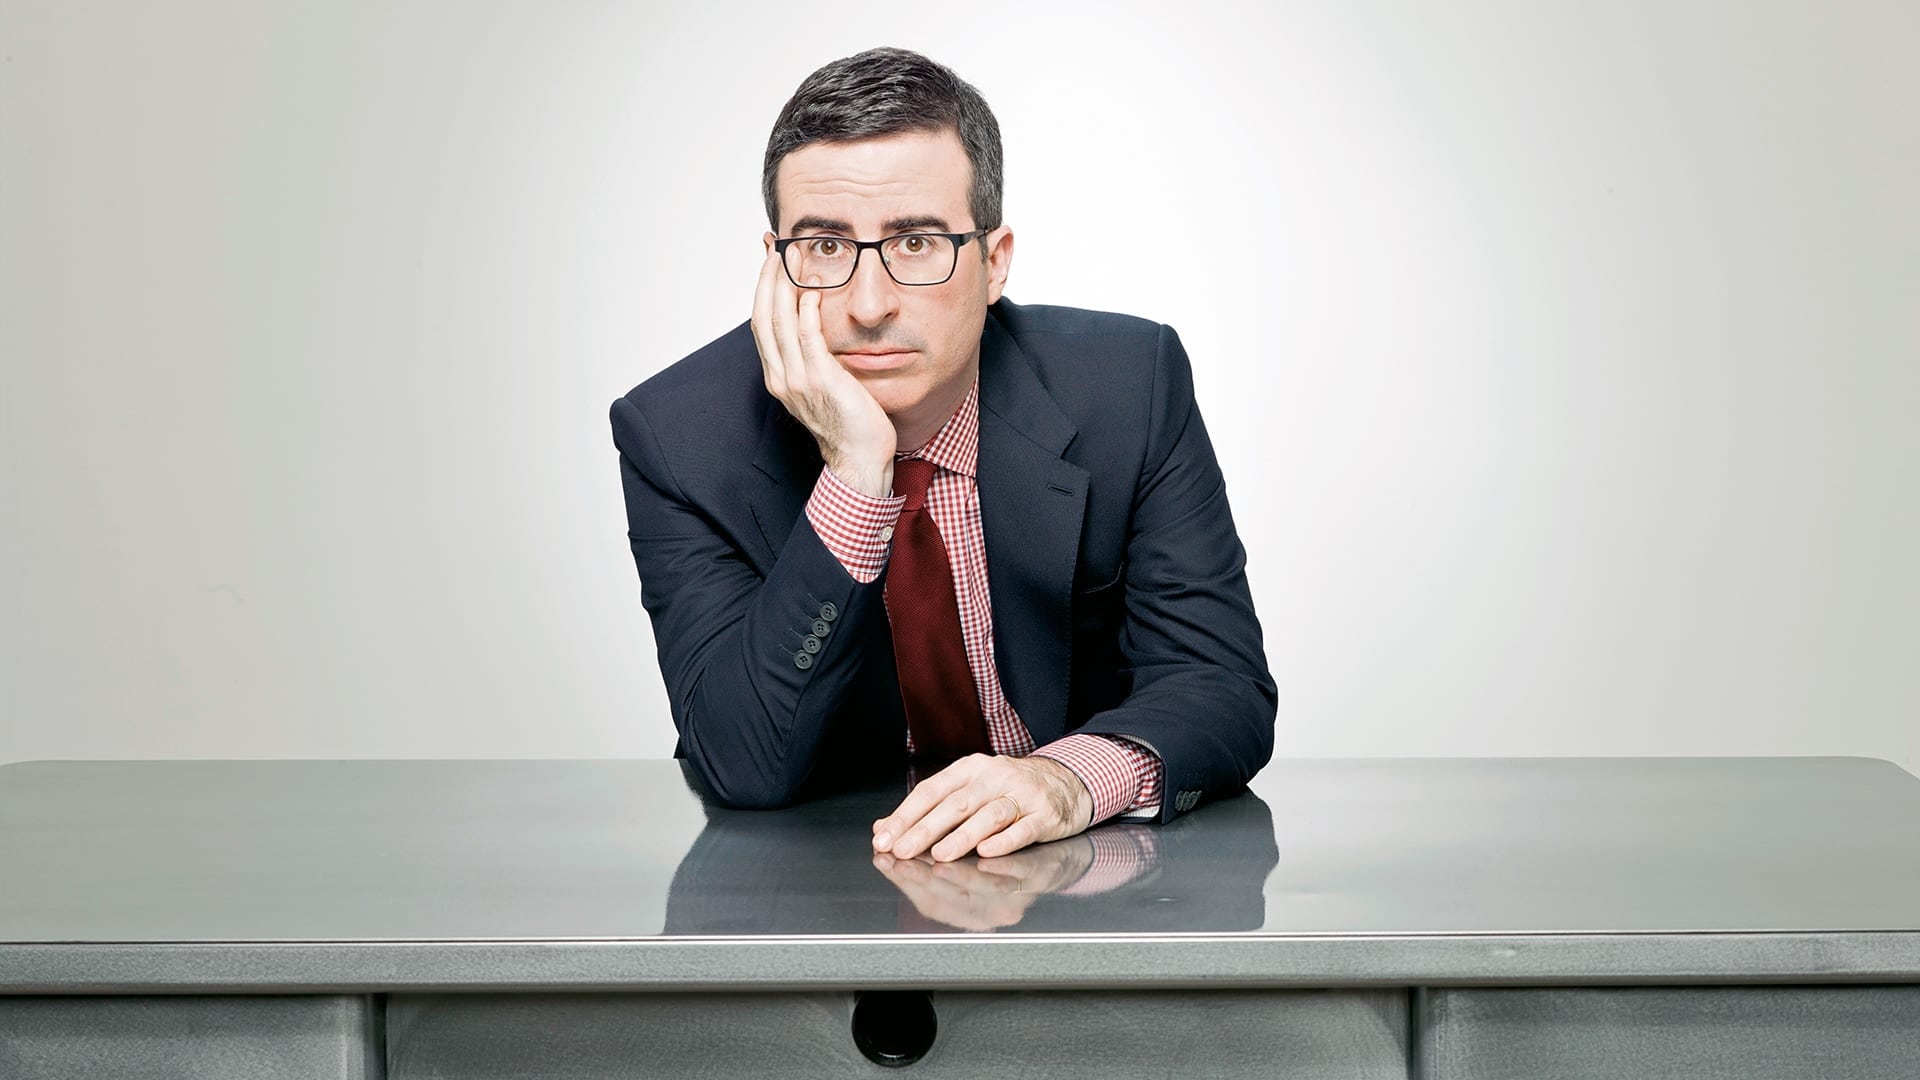 Last Week Tonight with John Oliver 2014 123movies